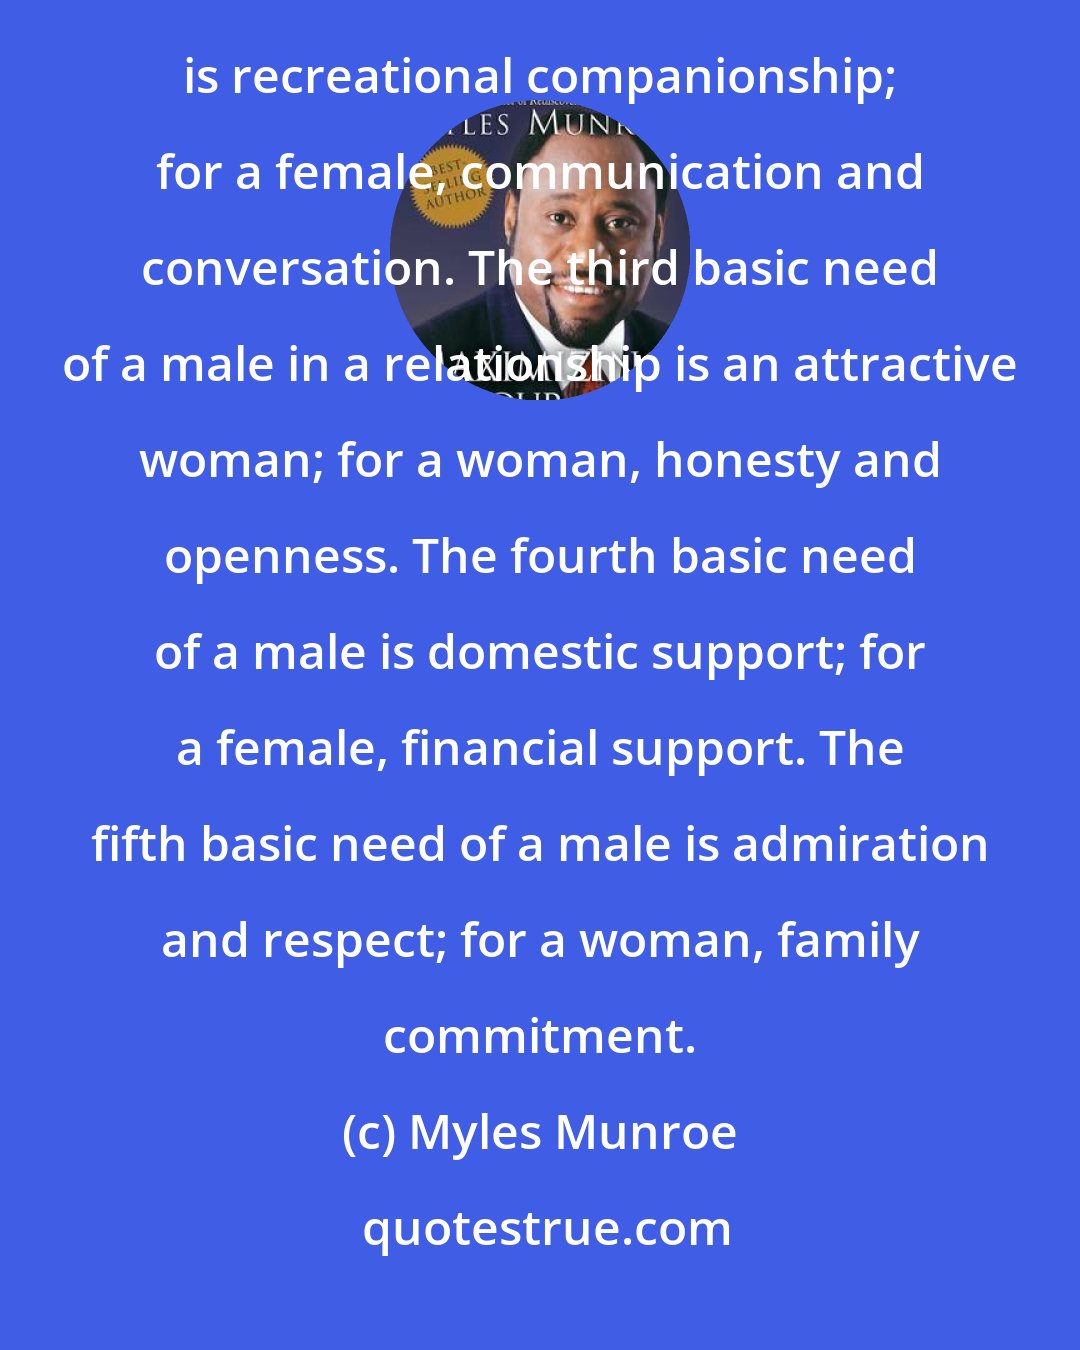 Myles Munroe: The first basic need of a male is sexual fulfillment; for a female, affection. The second most basic need of a male is recreational companionship; for a female, communication and conversation. The third basic need of a male in a relationship is an attractive woman; for a woman, honesty and openness. The fourth basic need of a male is domestic support; for a female, financial support. The fifth basic need of a male is admiration and respect; for a woman, family commitment.